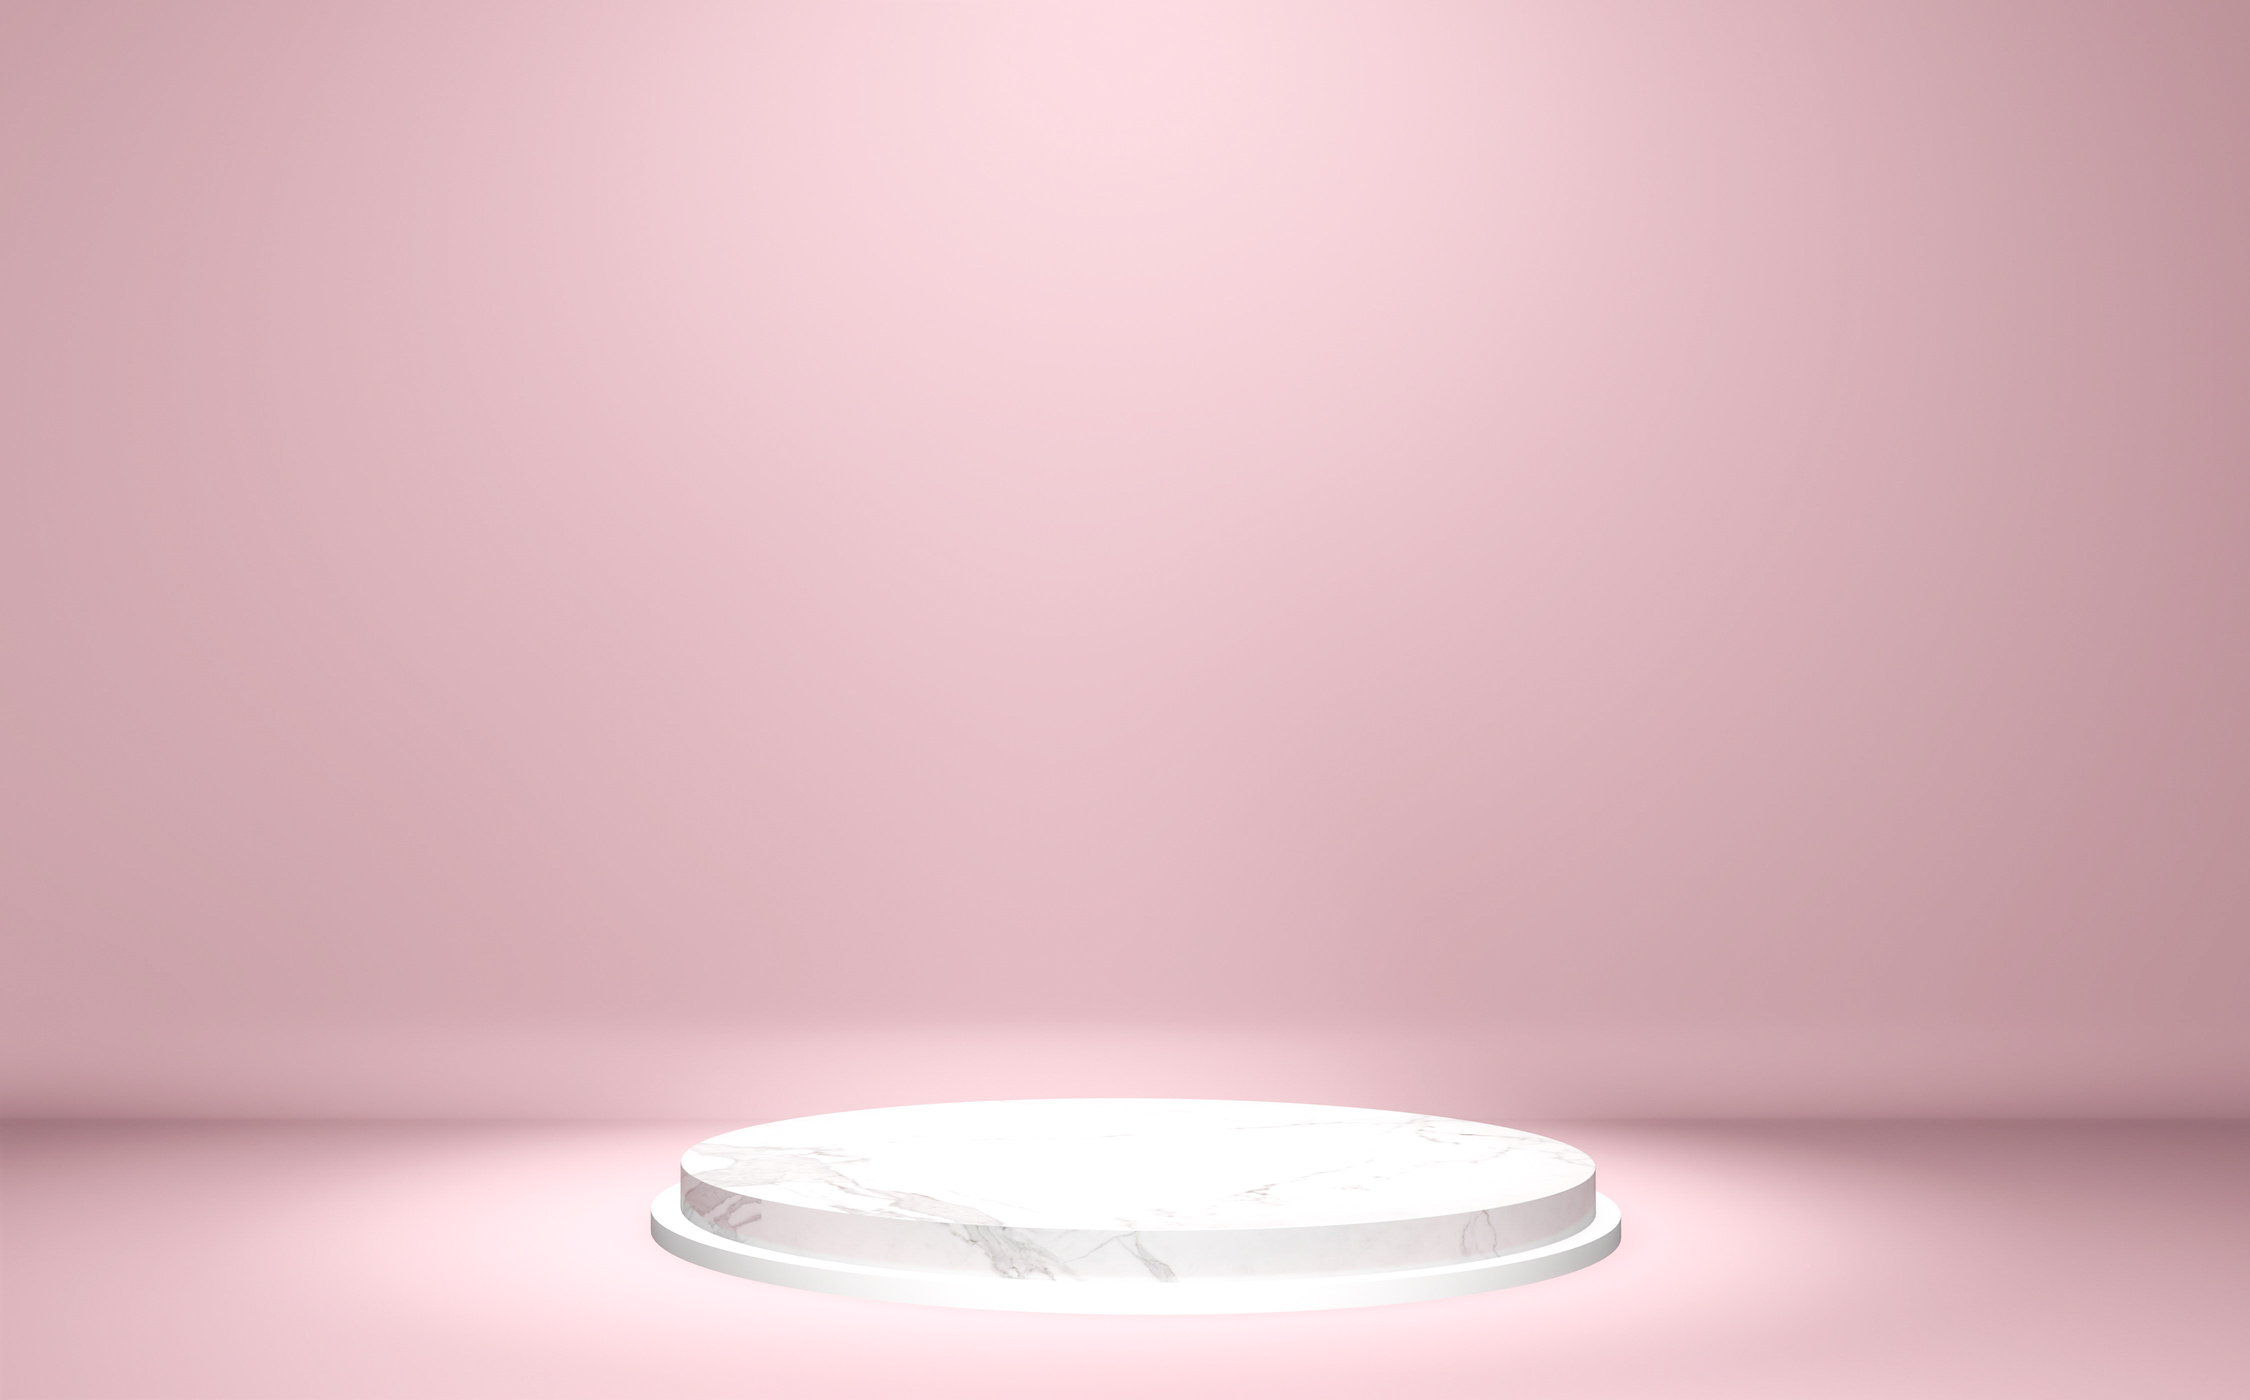 3D Render of White Podium on Pink Background